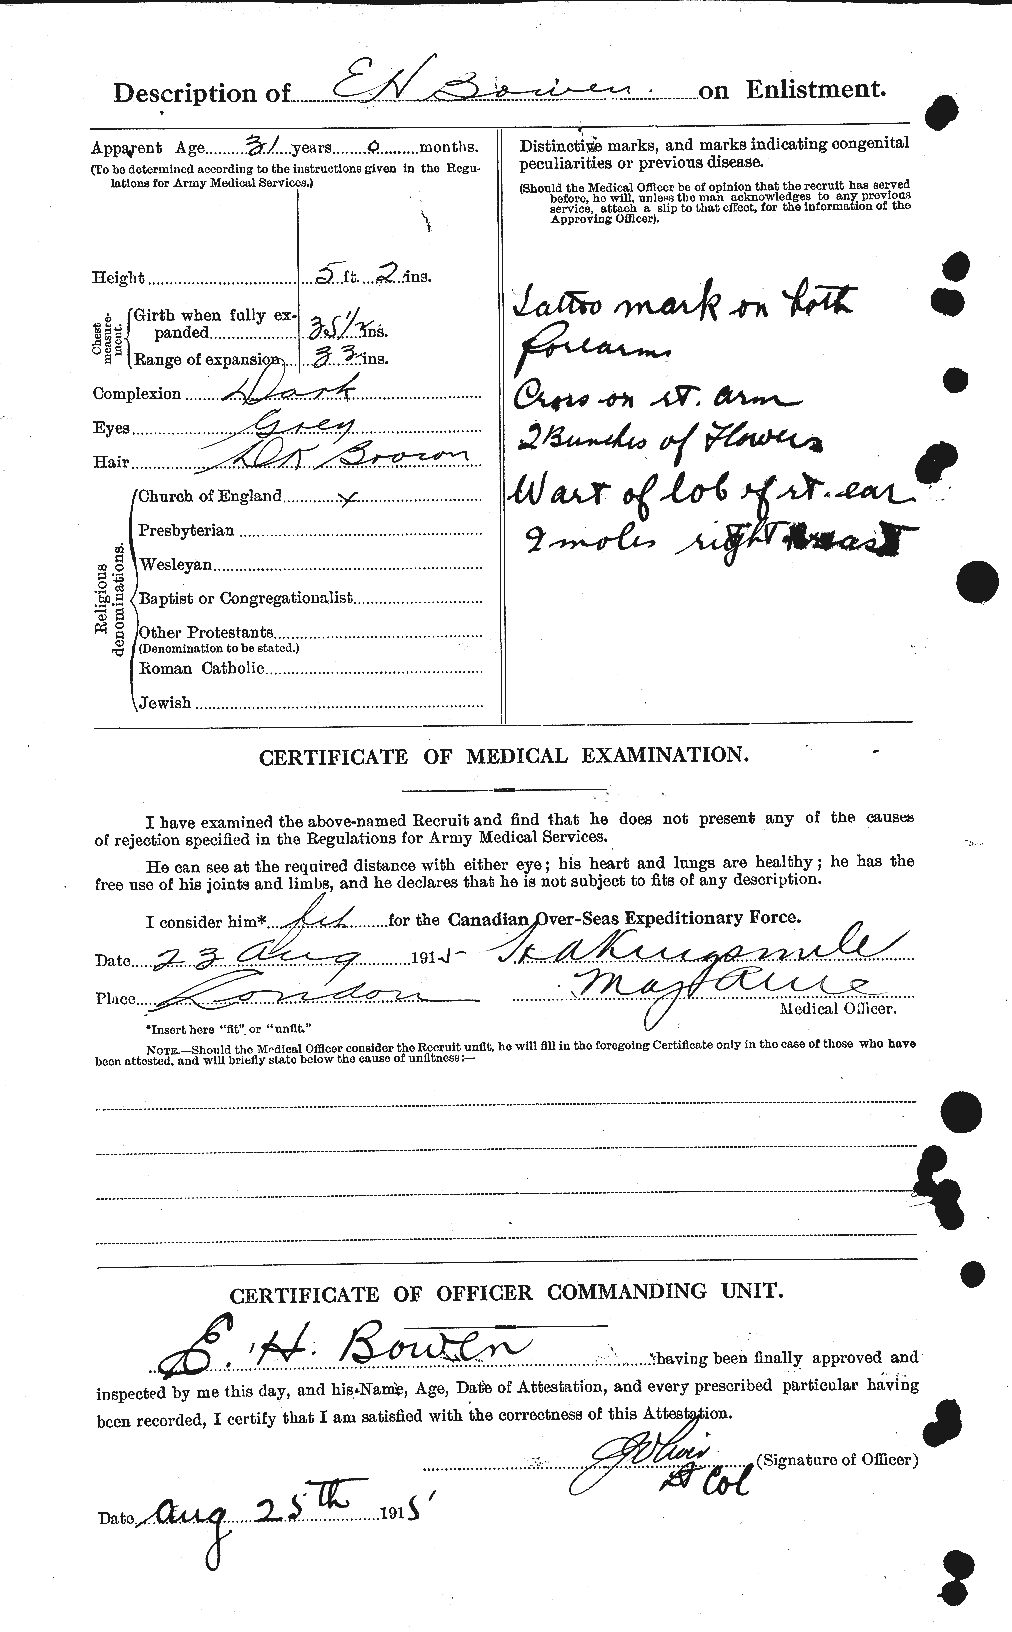 Personnel Records of the First World War - CEF 255381b